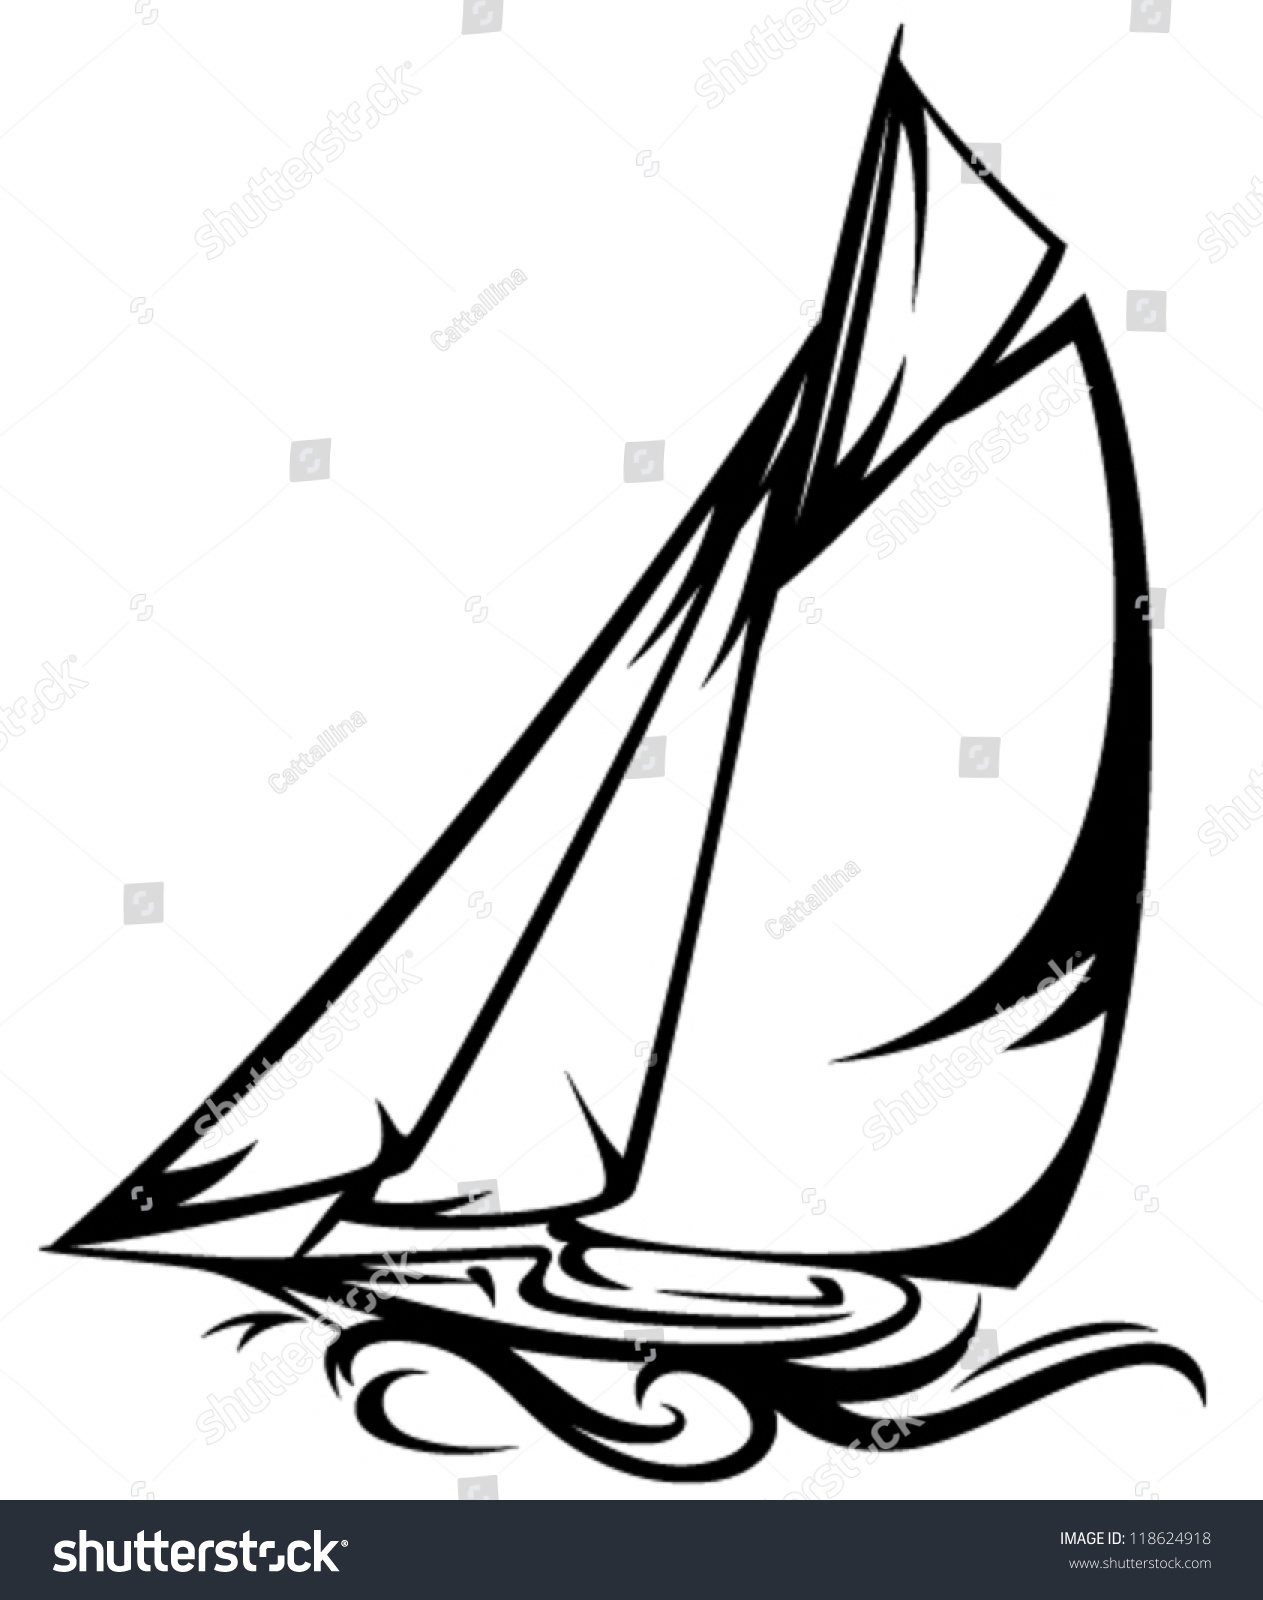 yacht clipart black and white - photo #45